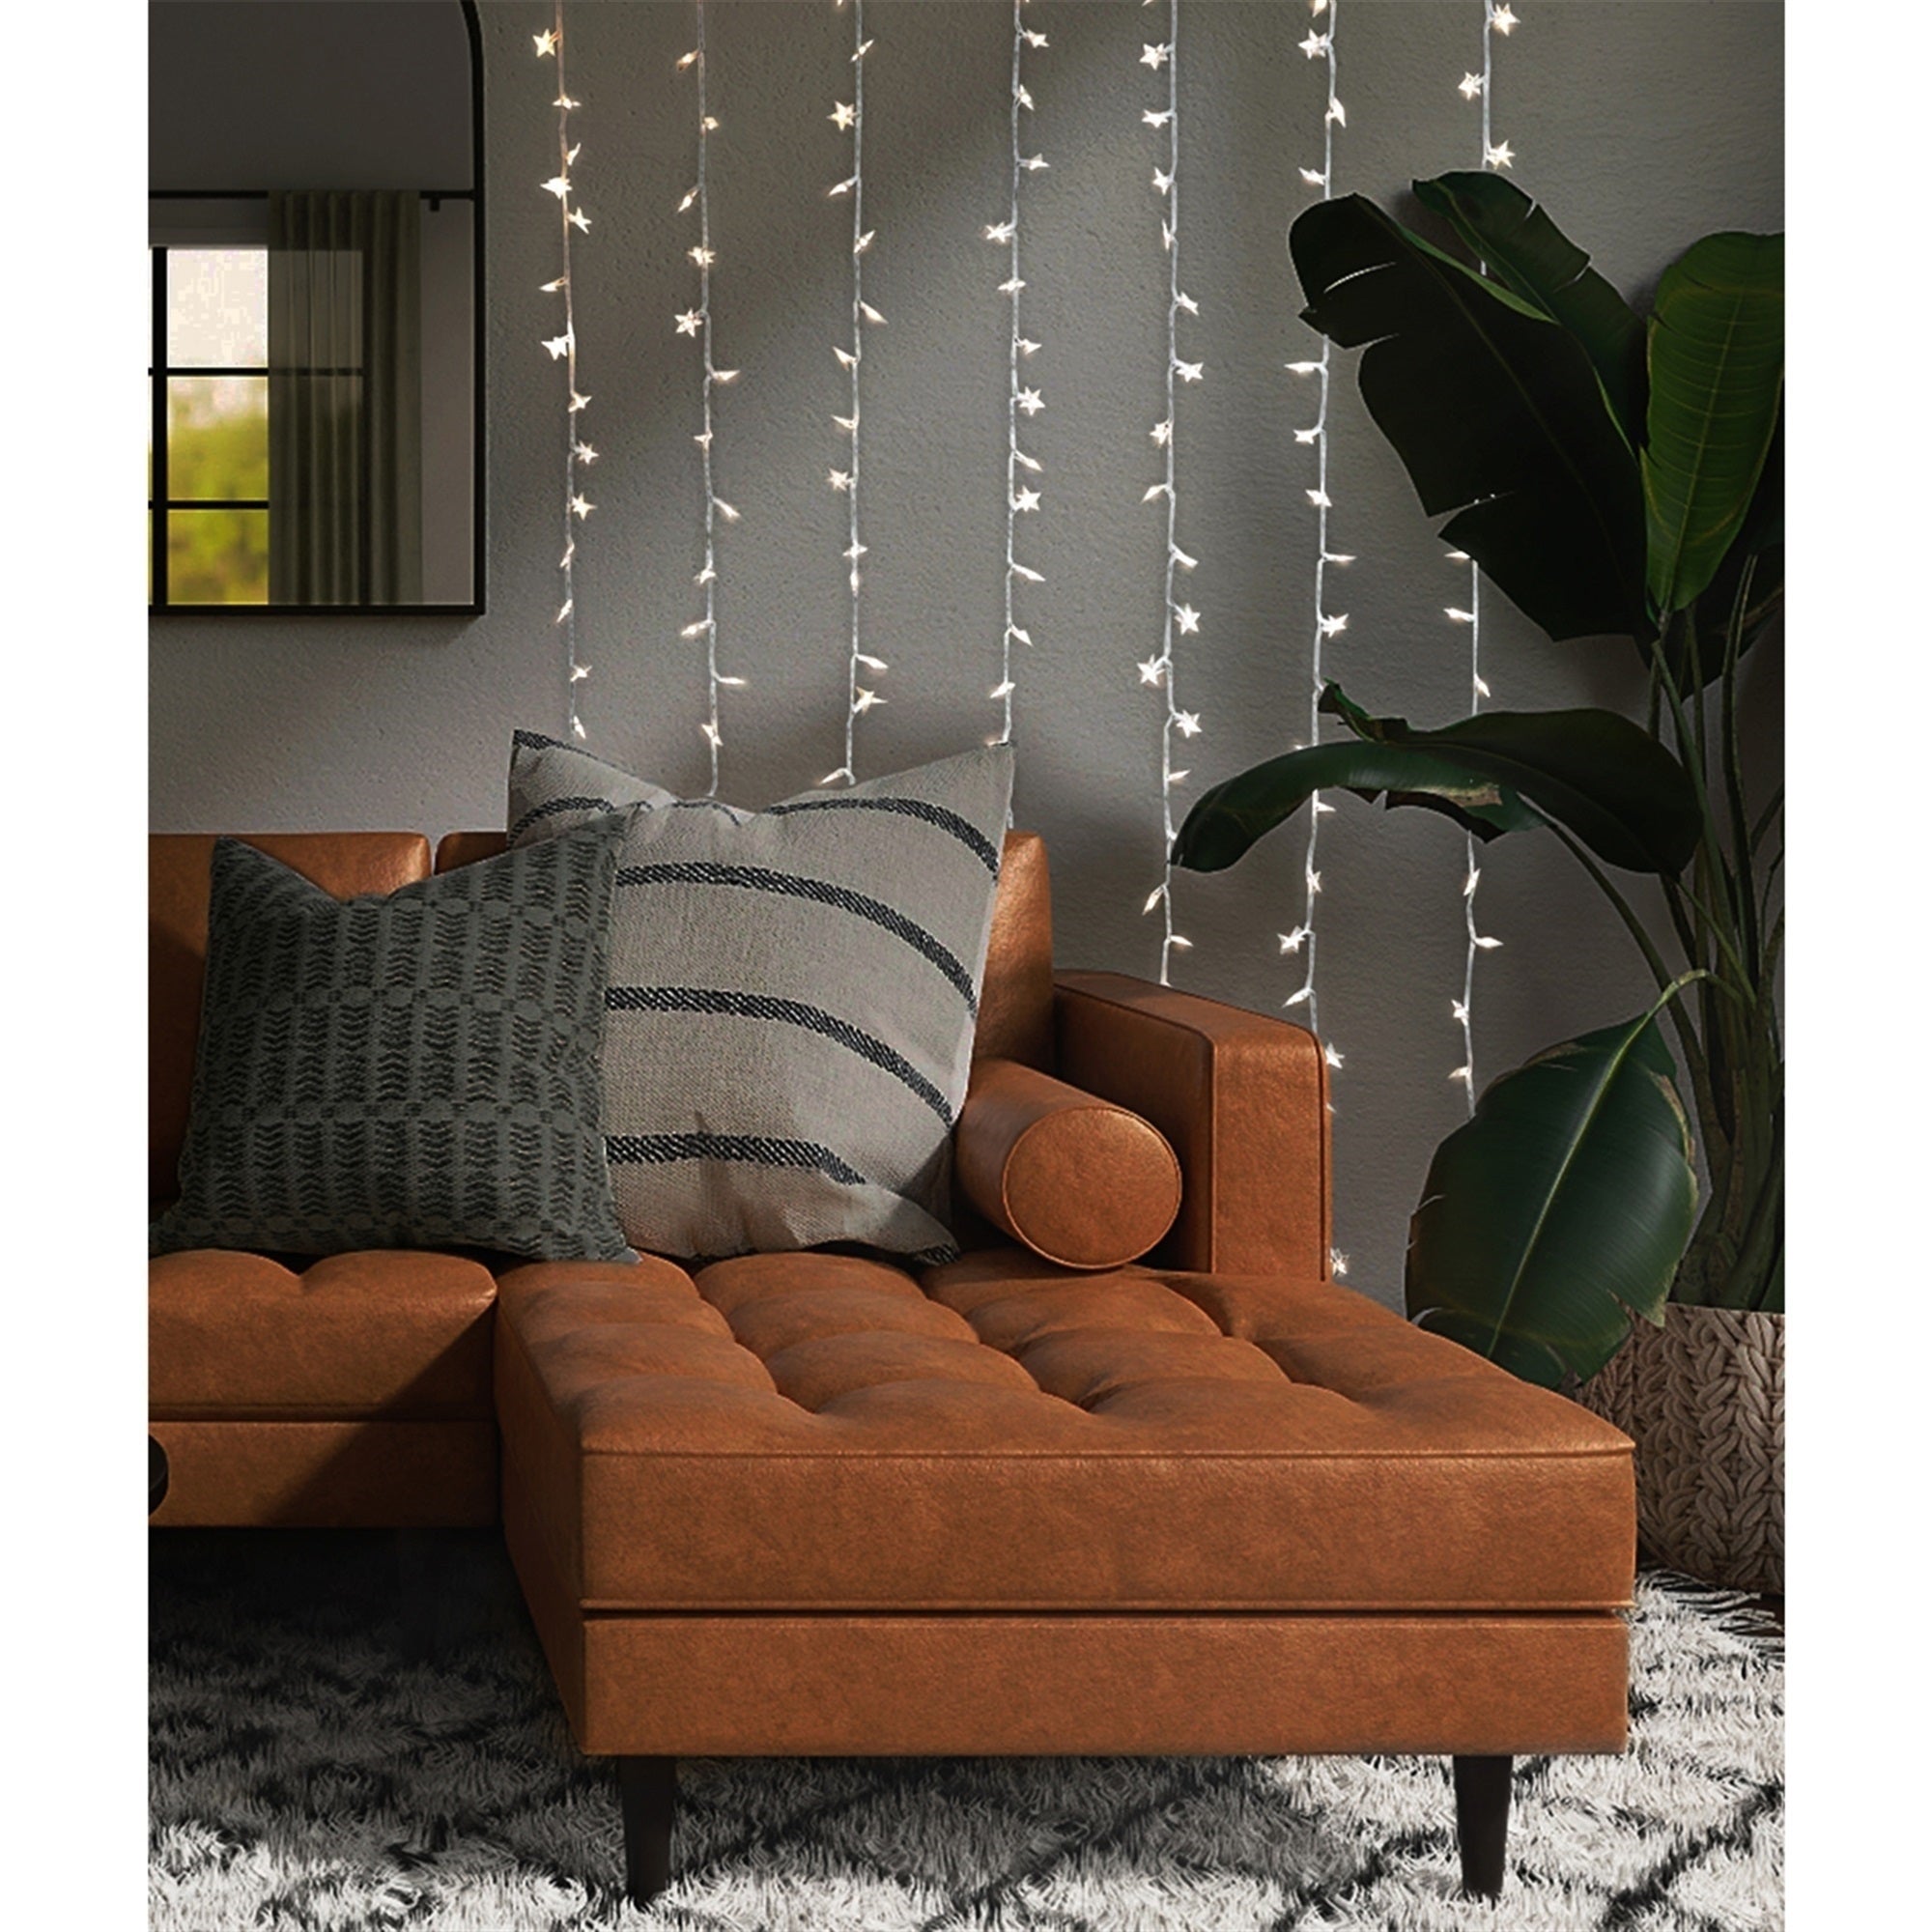 ProductWorks 8-Function String Light Curtain, 300 Warm White LED Stars, 6.5 x 10 feet